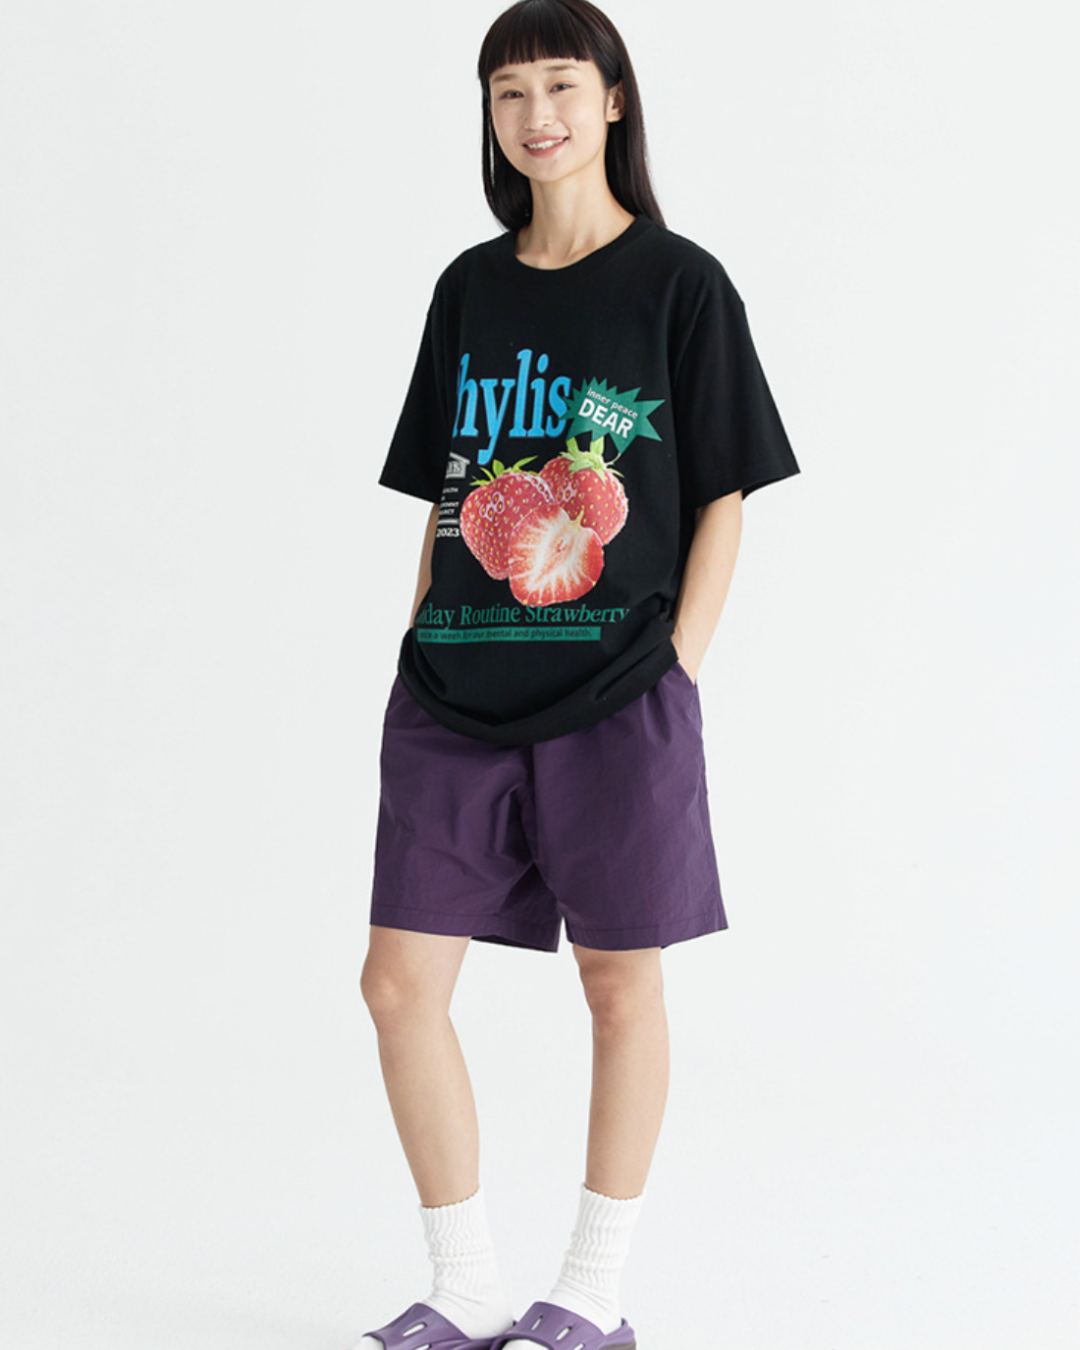 Phylis Oversized Tee in Black